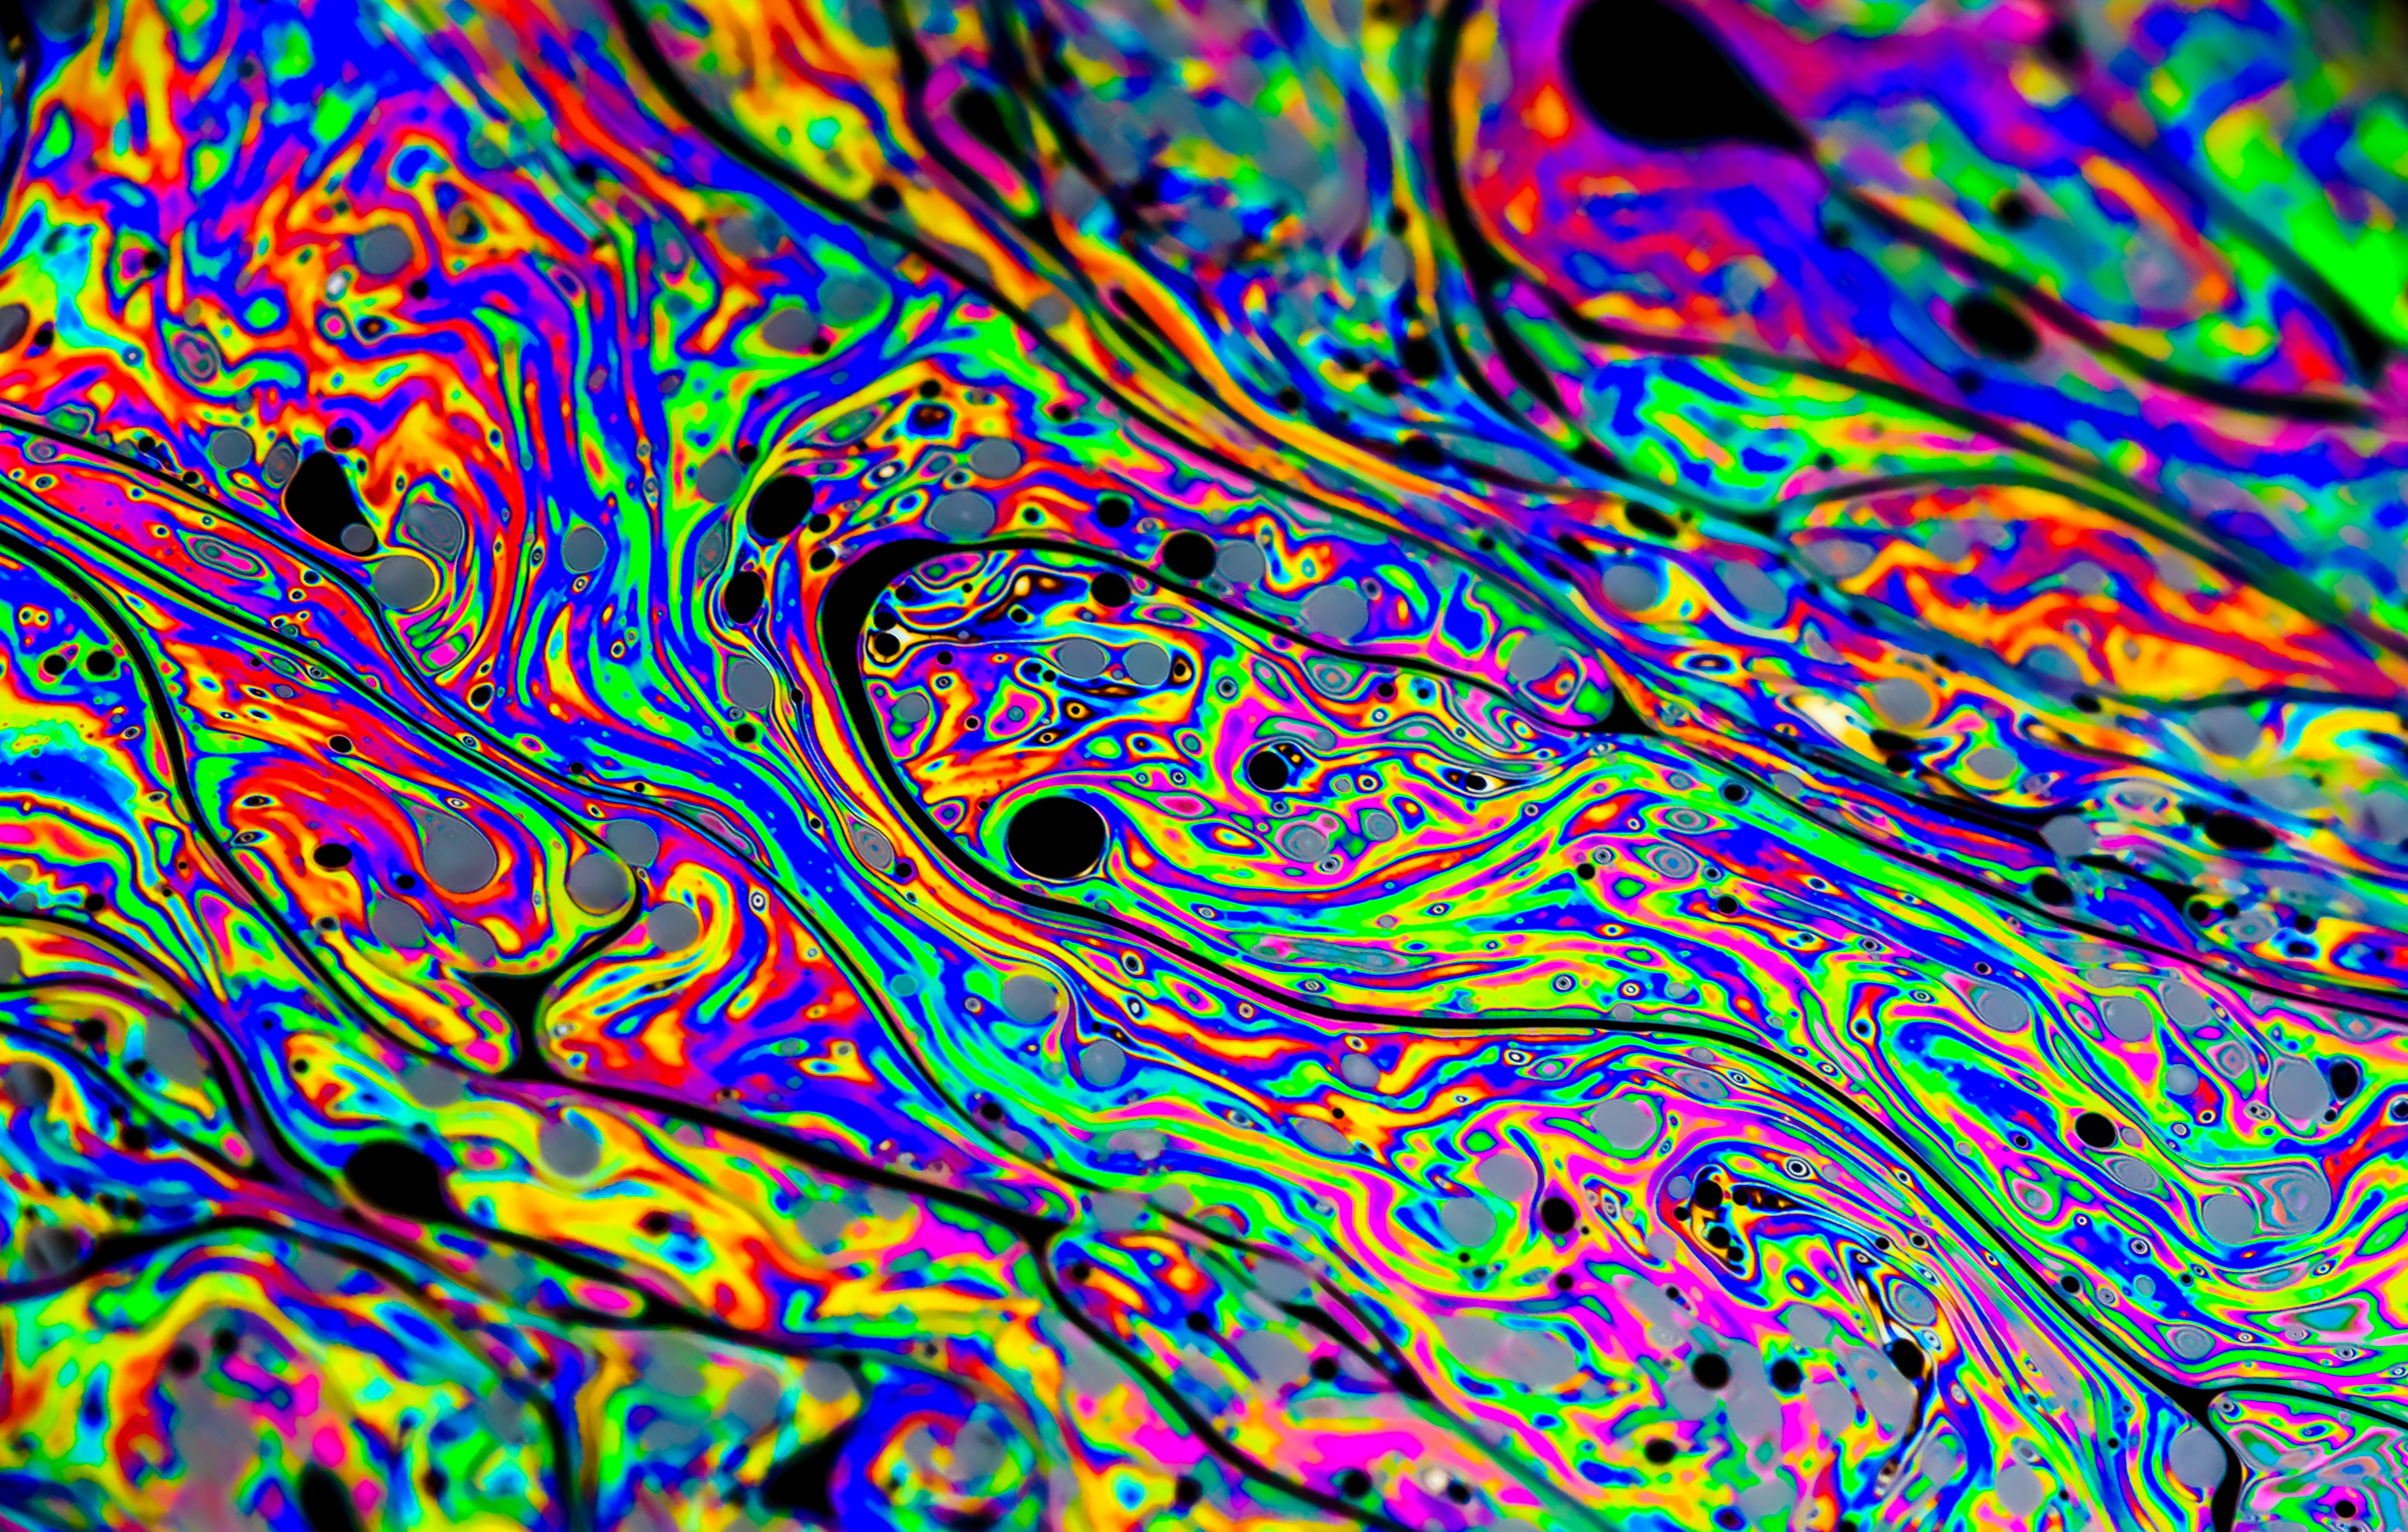 Abstract highly vibrant colorful swirls